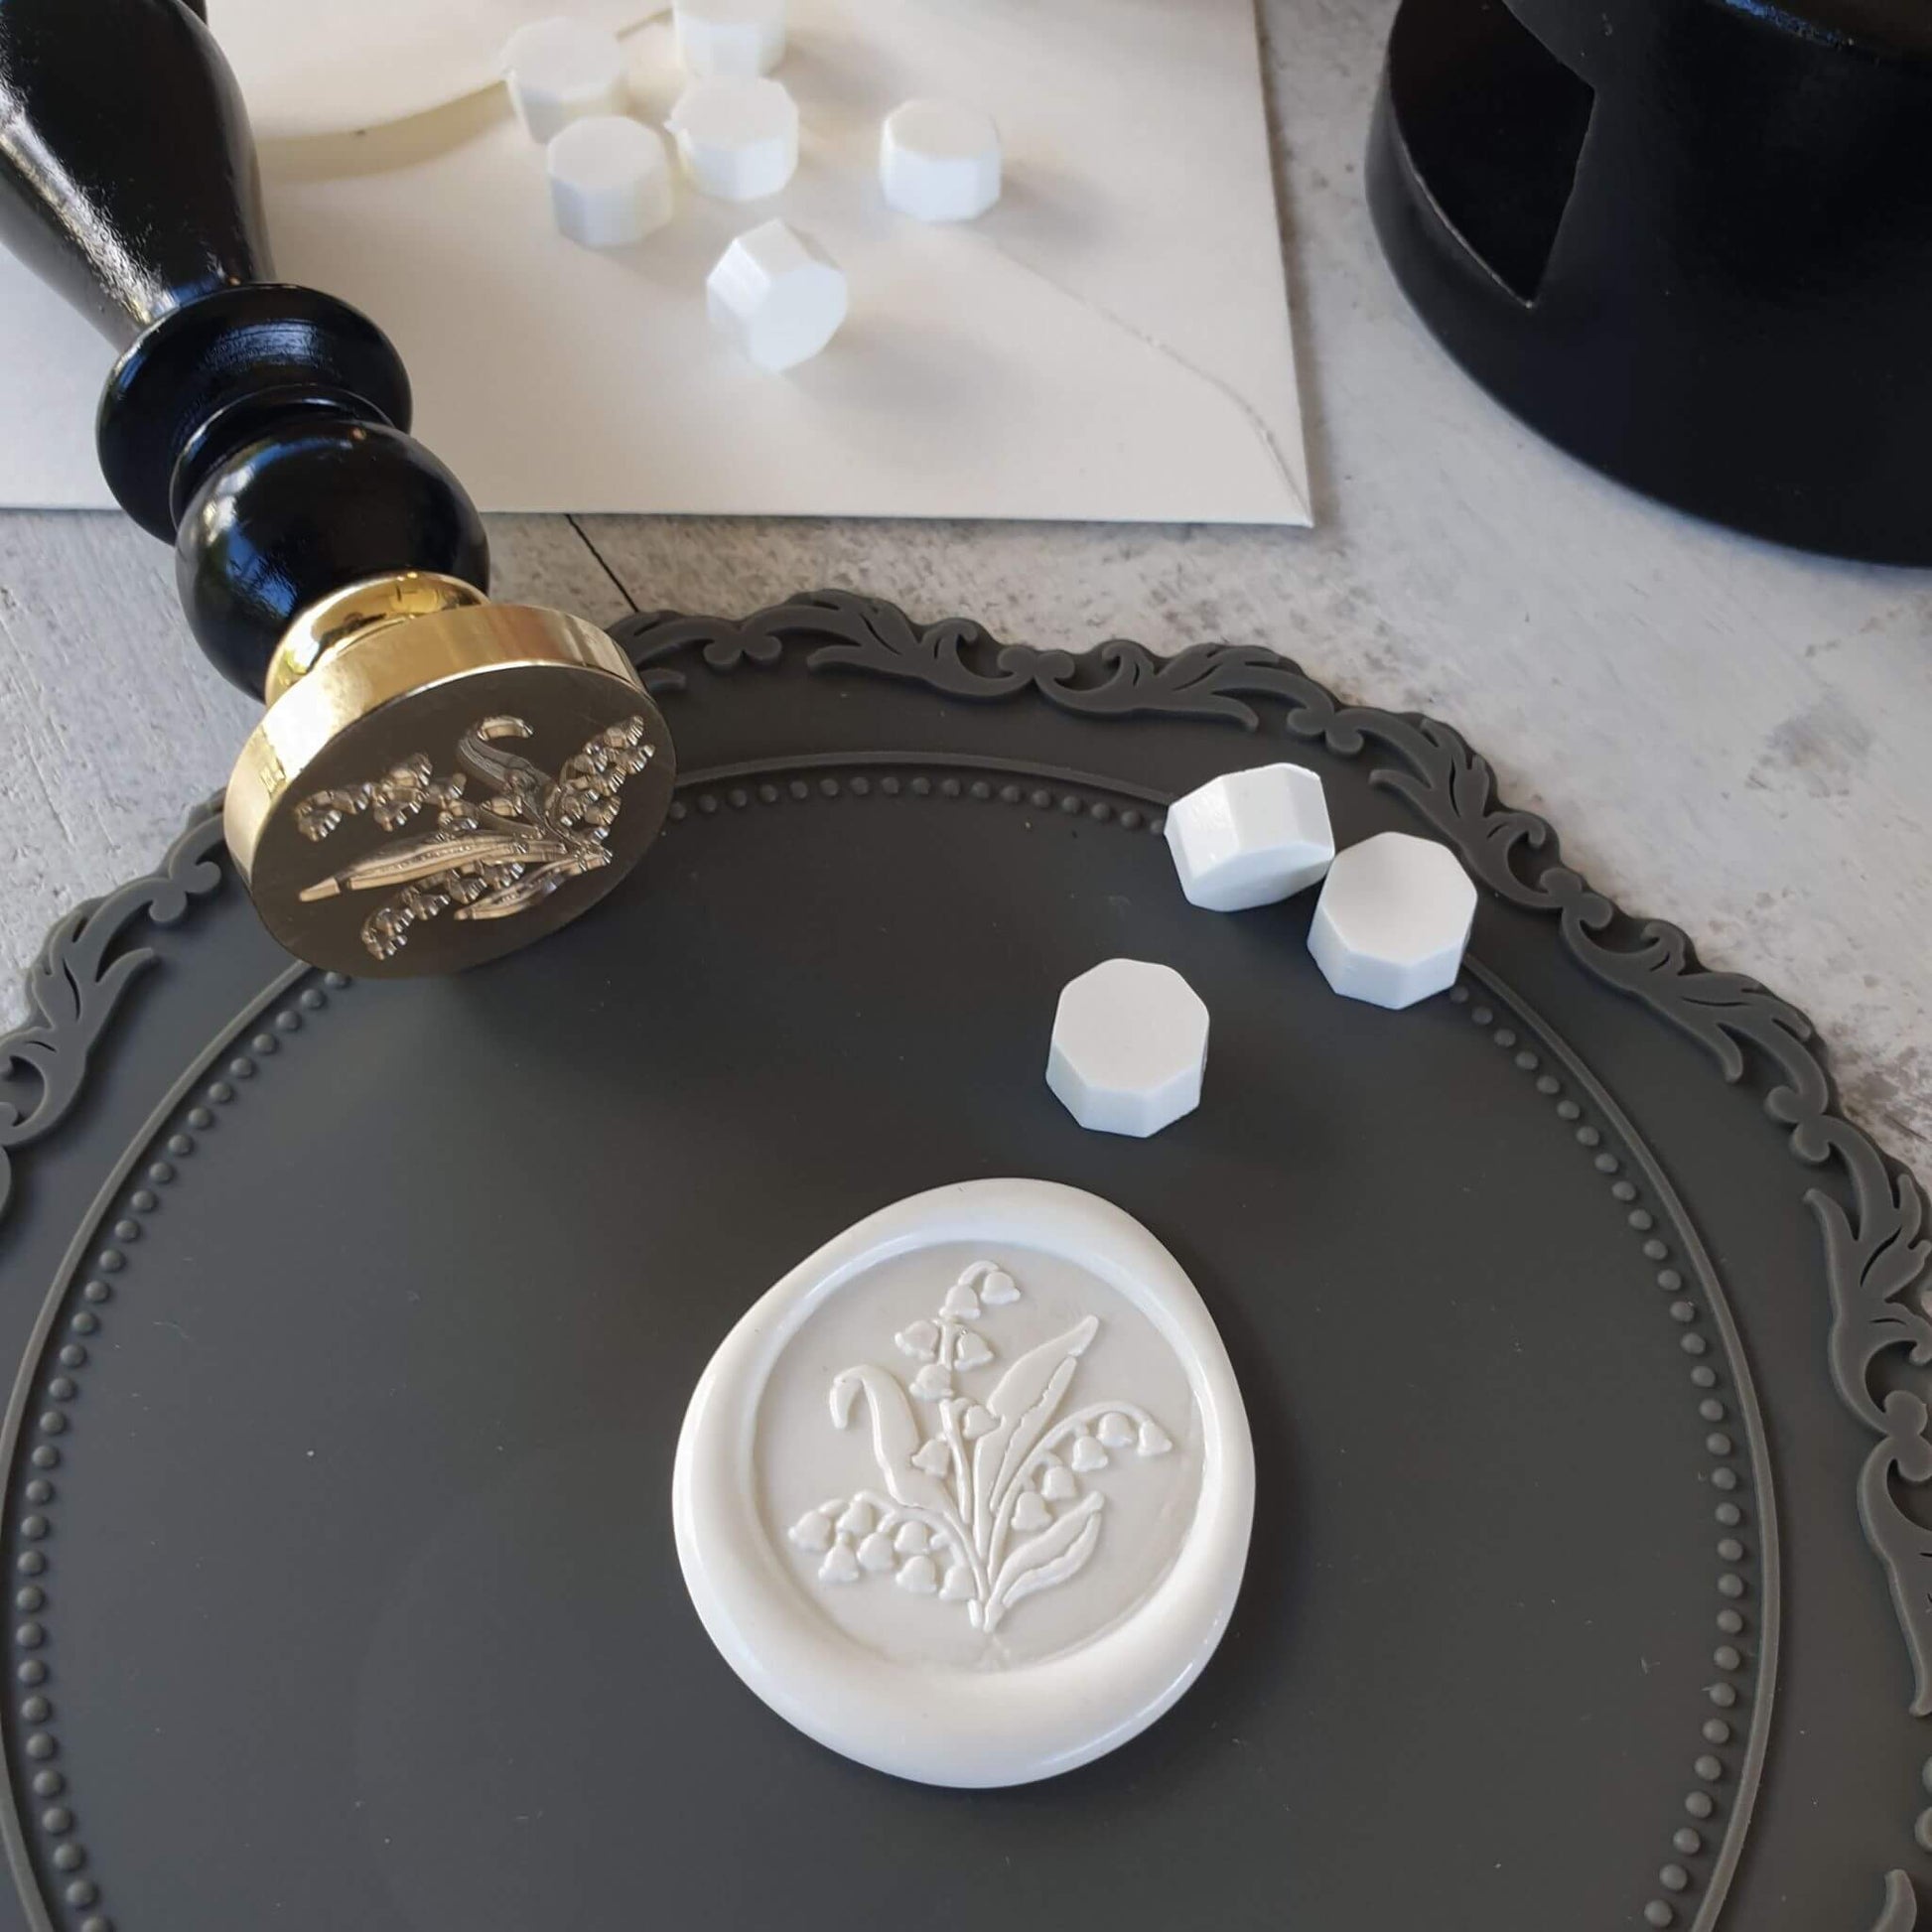 Lily of the valley wax seal and wax stamp on grey silicone mat